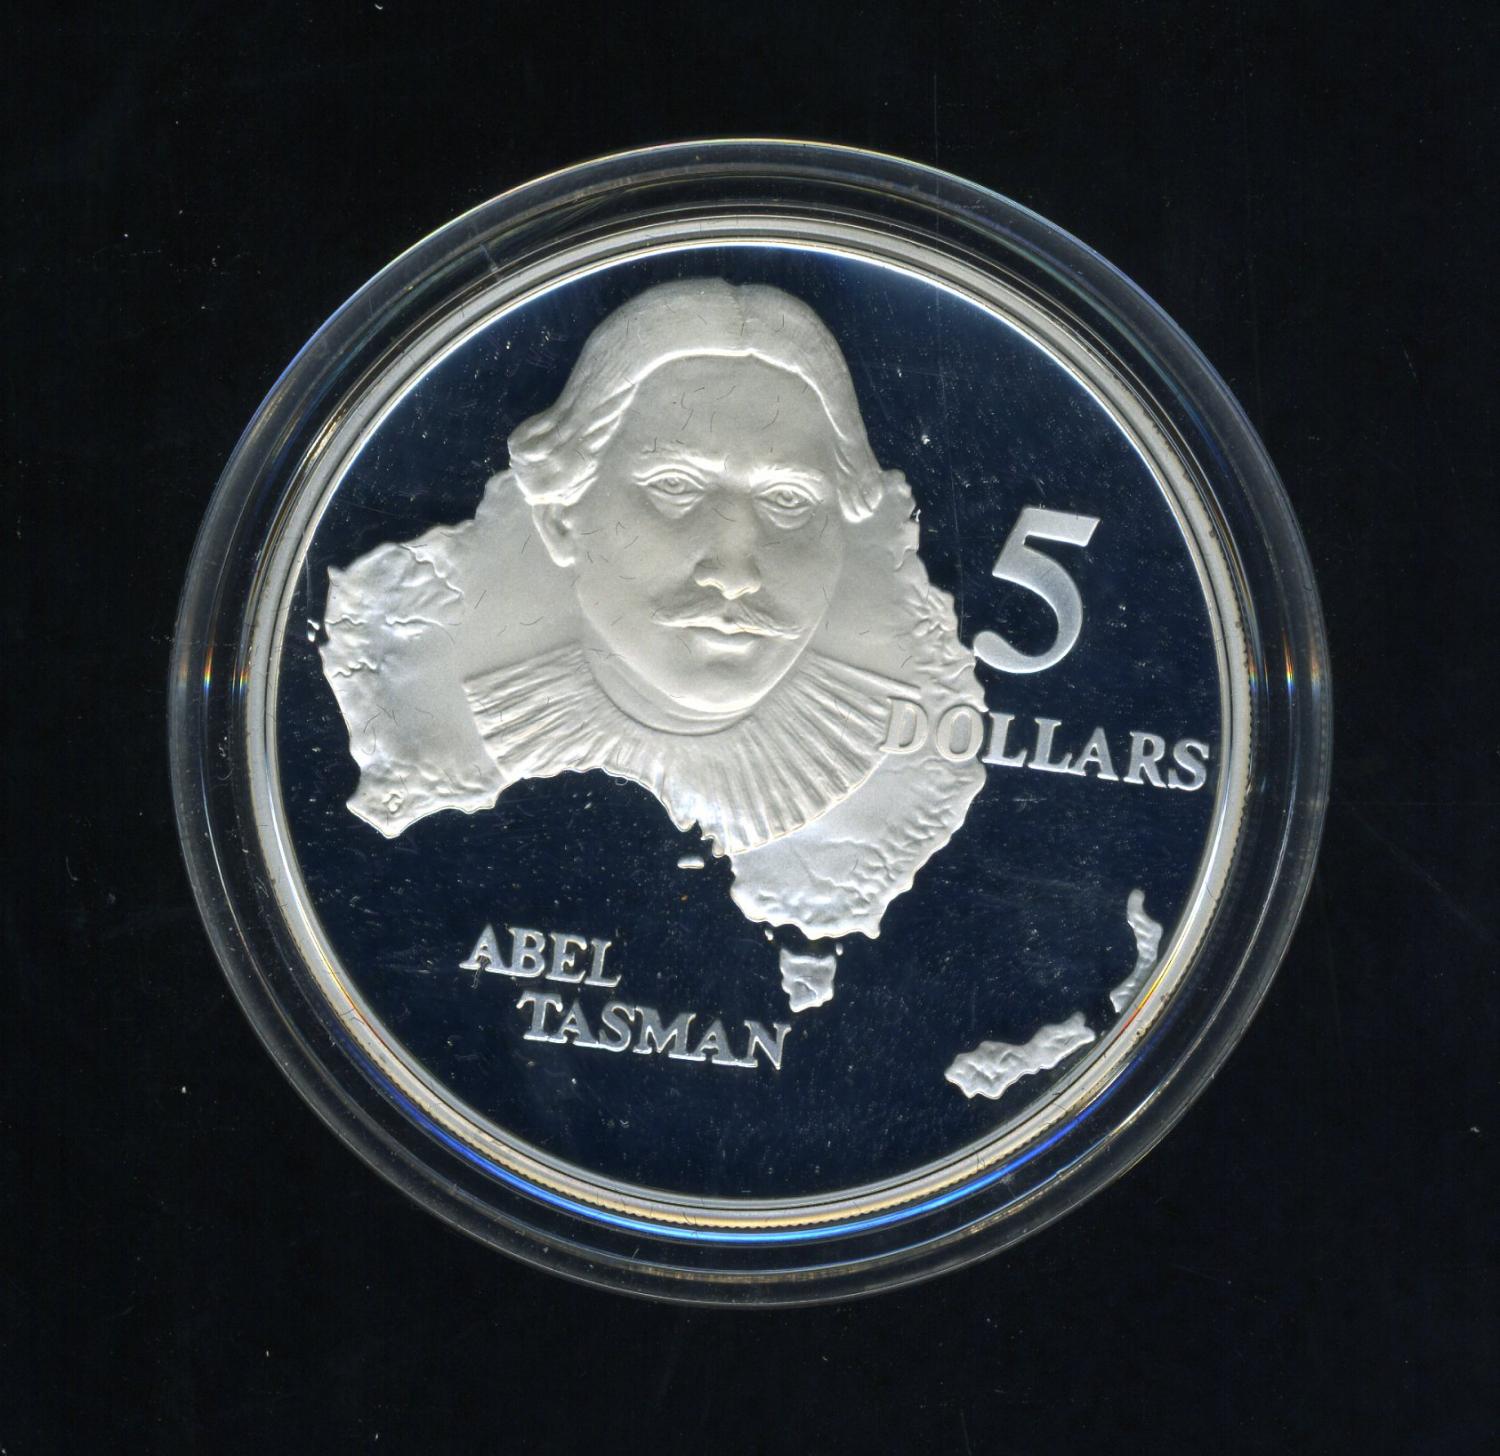 Thumbnail for 1993 Australian $5 Silver Coin from Masterpieces in Silver Set - Abel Tasman.  The Coin is Sterling Silver and contains over 1oz of Pure Silver.